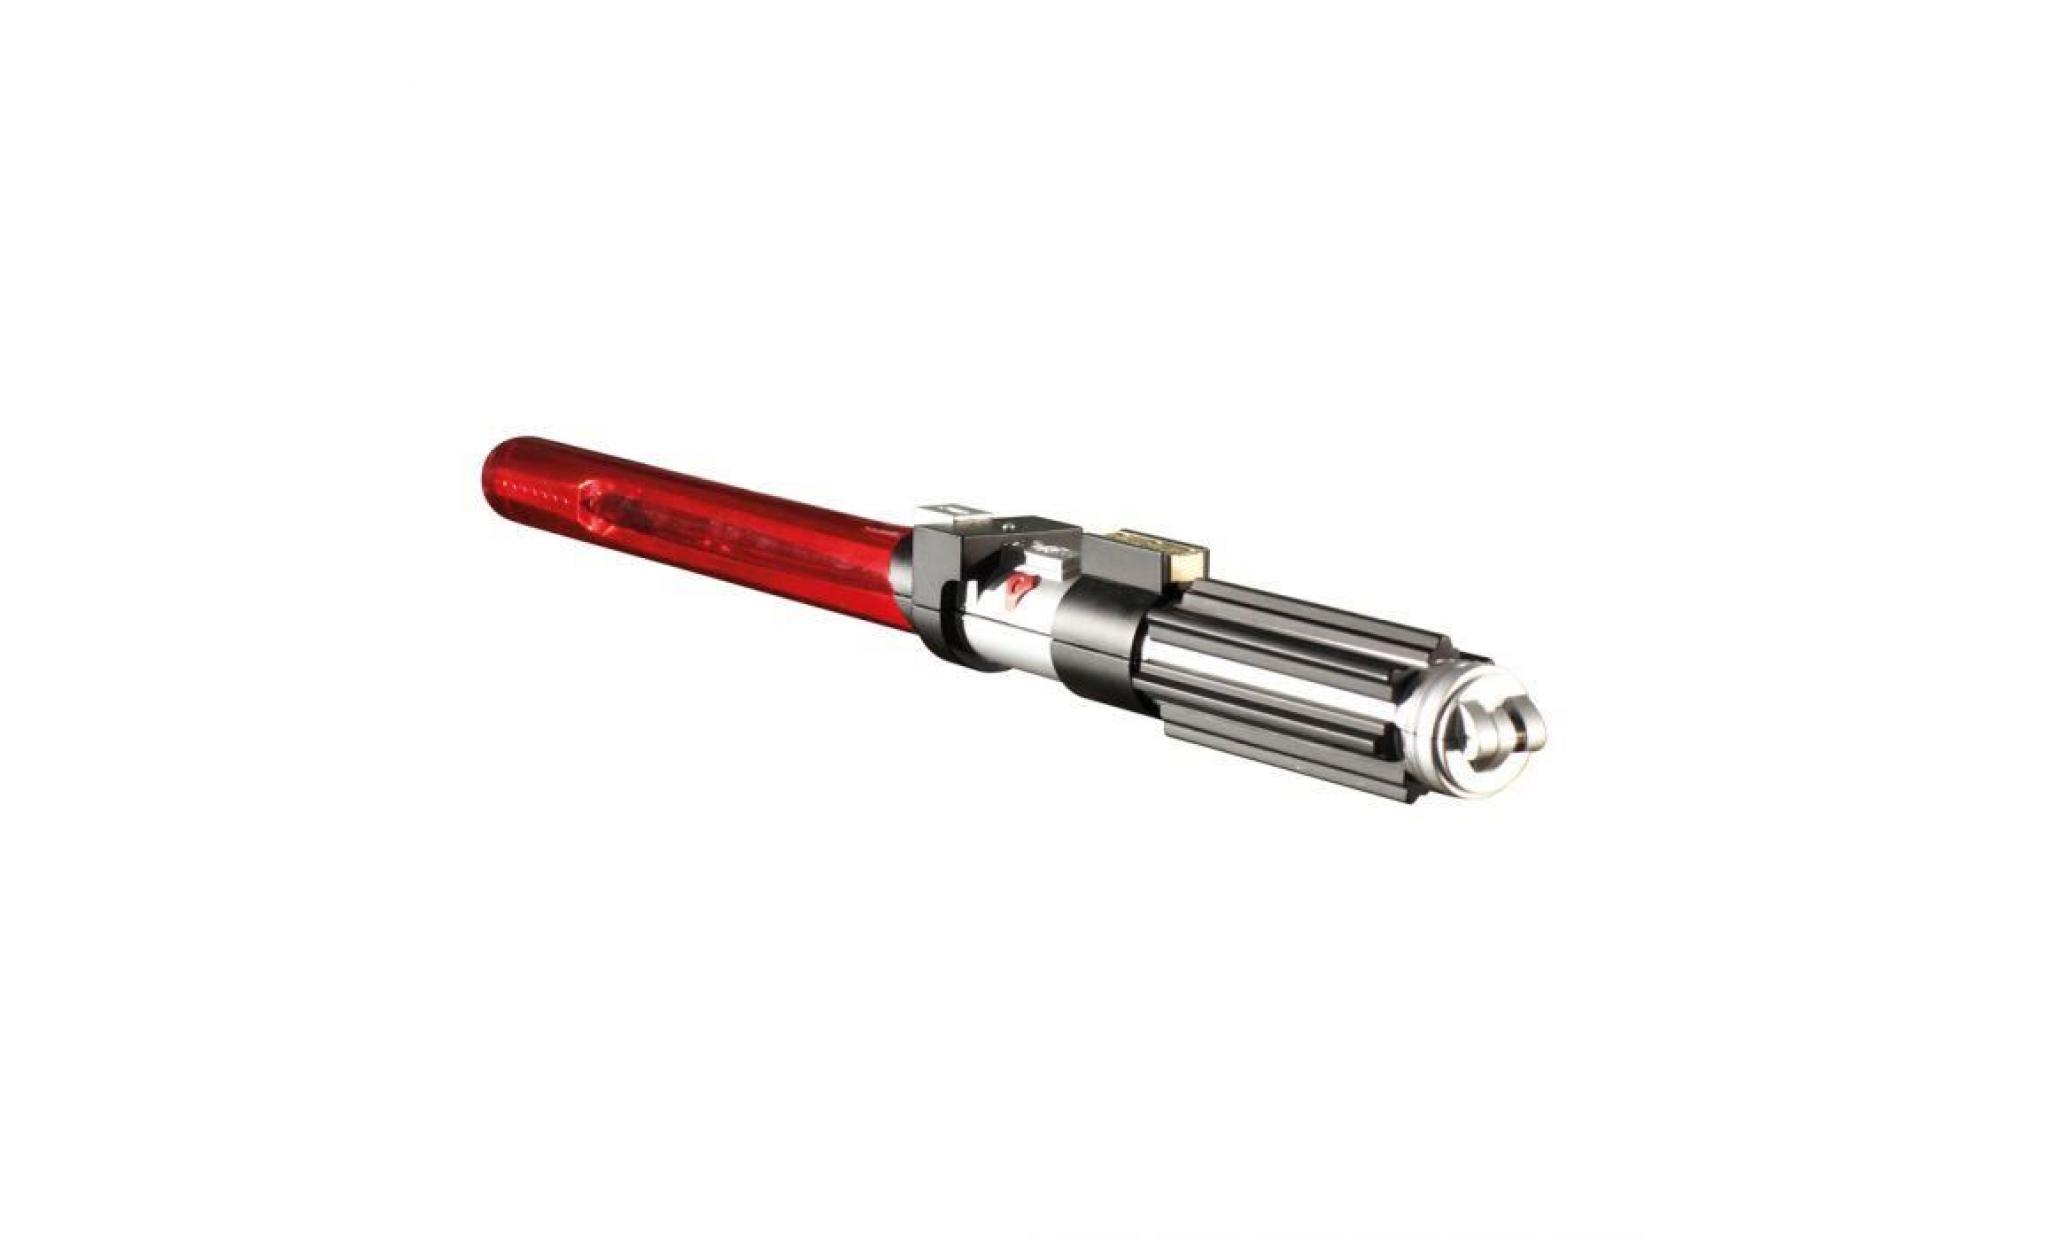 maxi pince pour barbecue sabre laser star wars pas cher